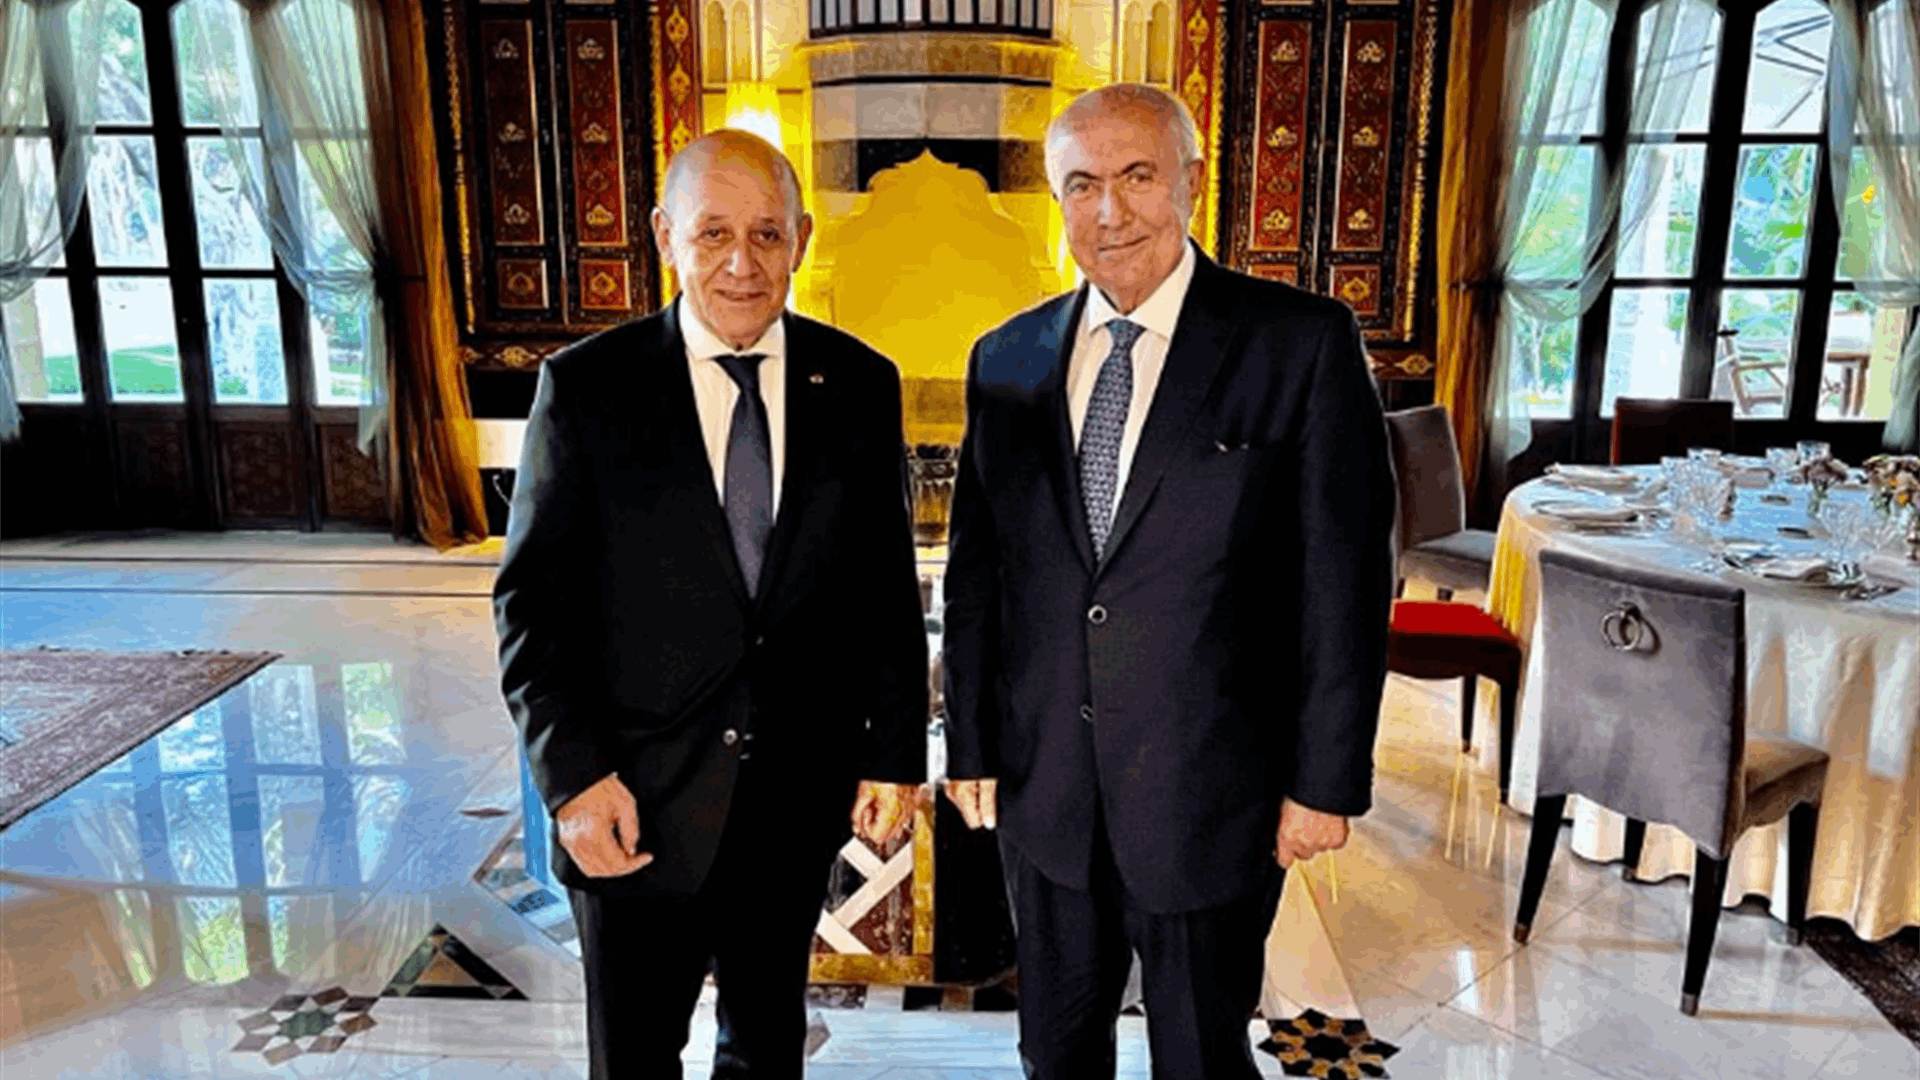 Makhzoumi meets Le Drian in Pine Palace